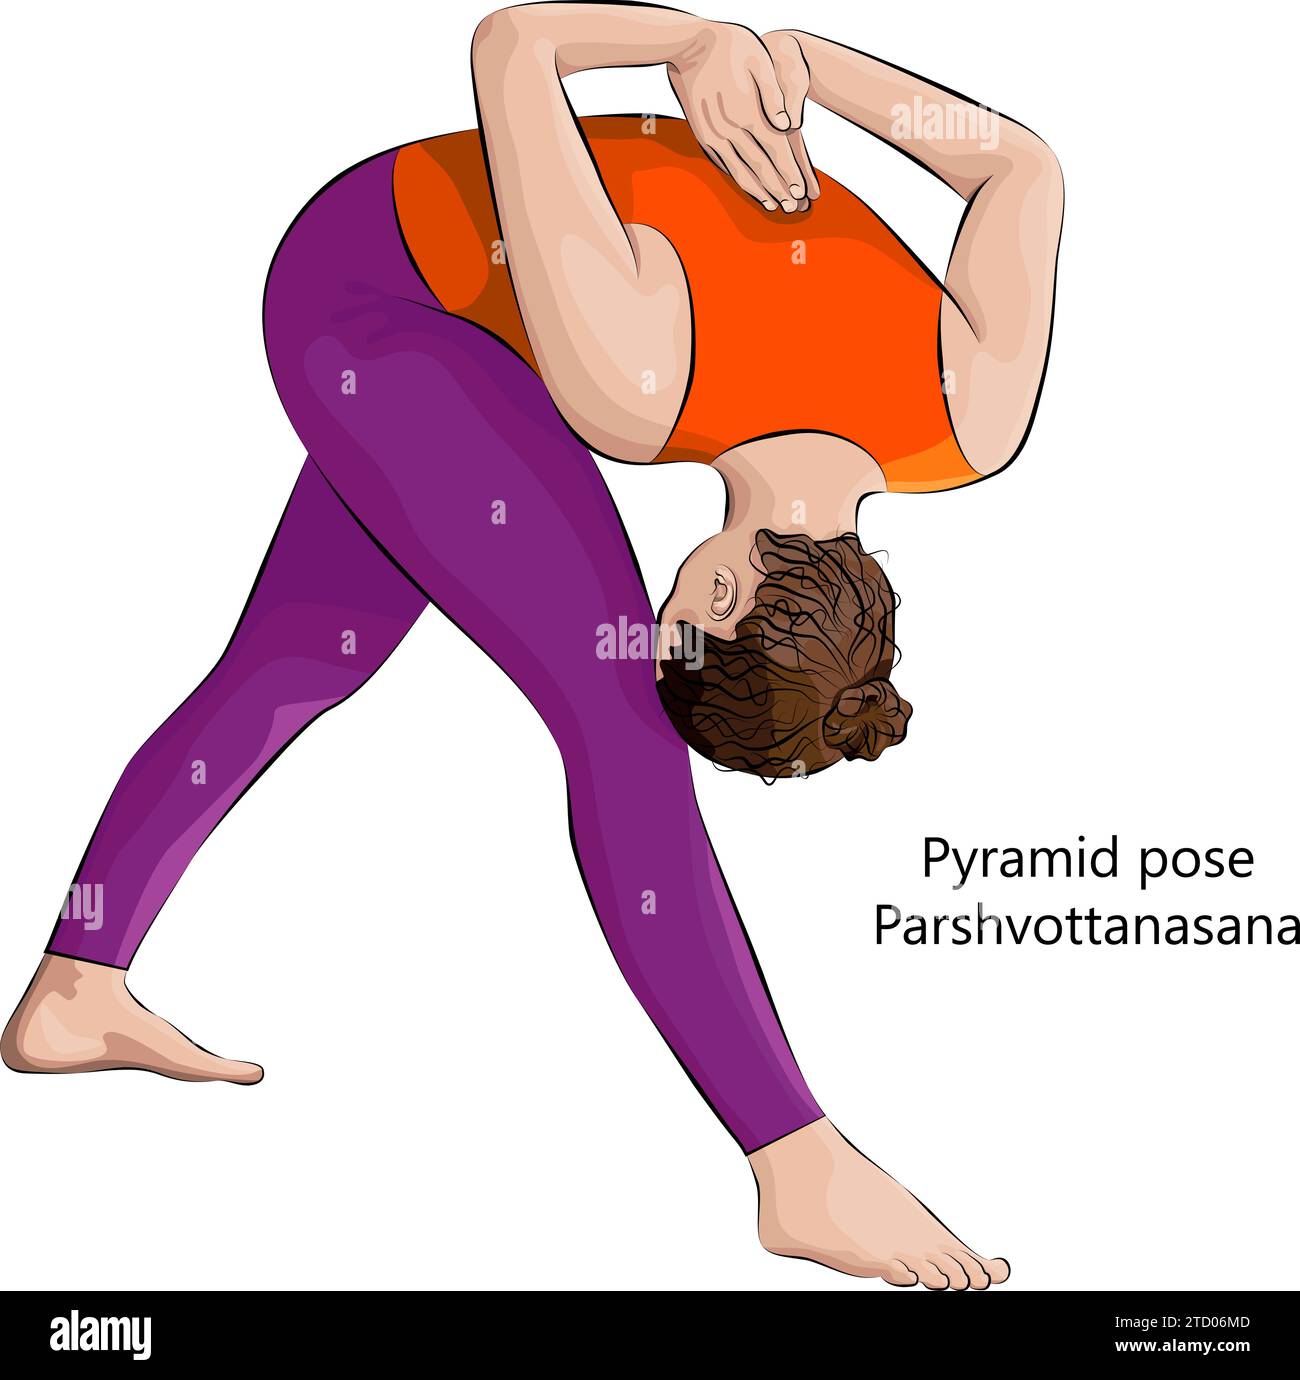 Young woman doing yoga Parshvottanasana. Pyramid pose or Intense Side Stretch pose. Intermediate Difficulty. Isolated vector illustration. Stock Vector